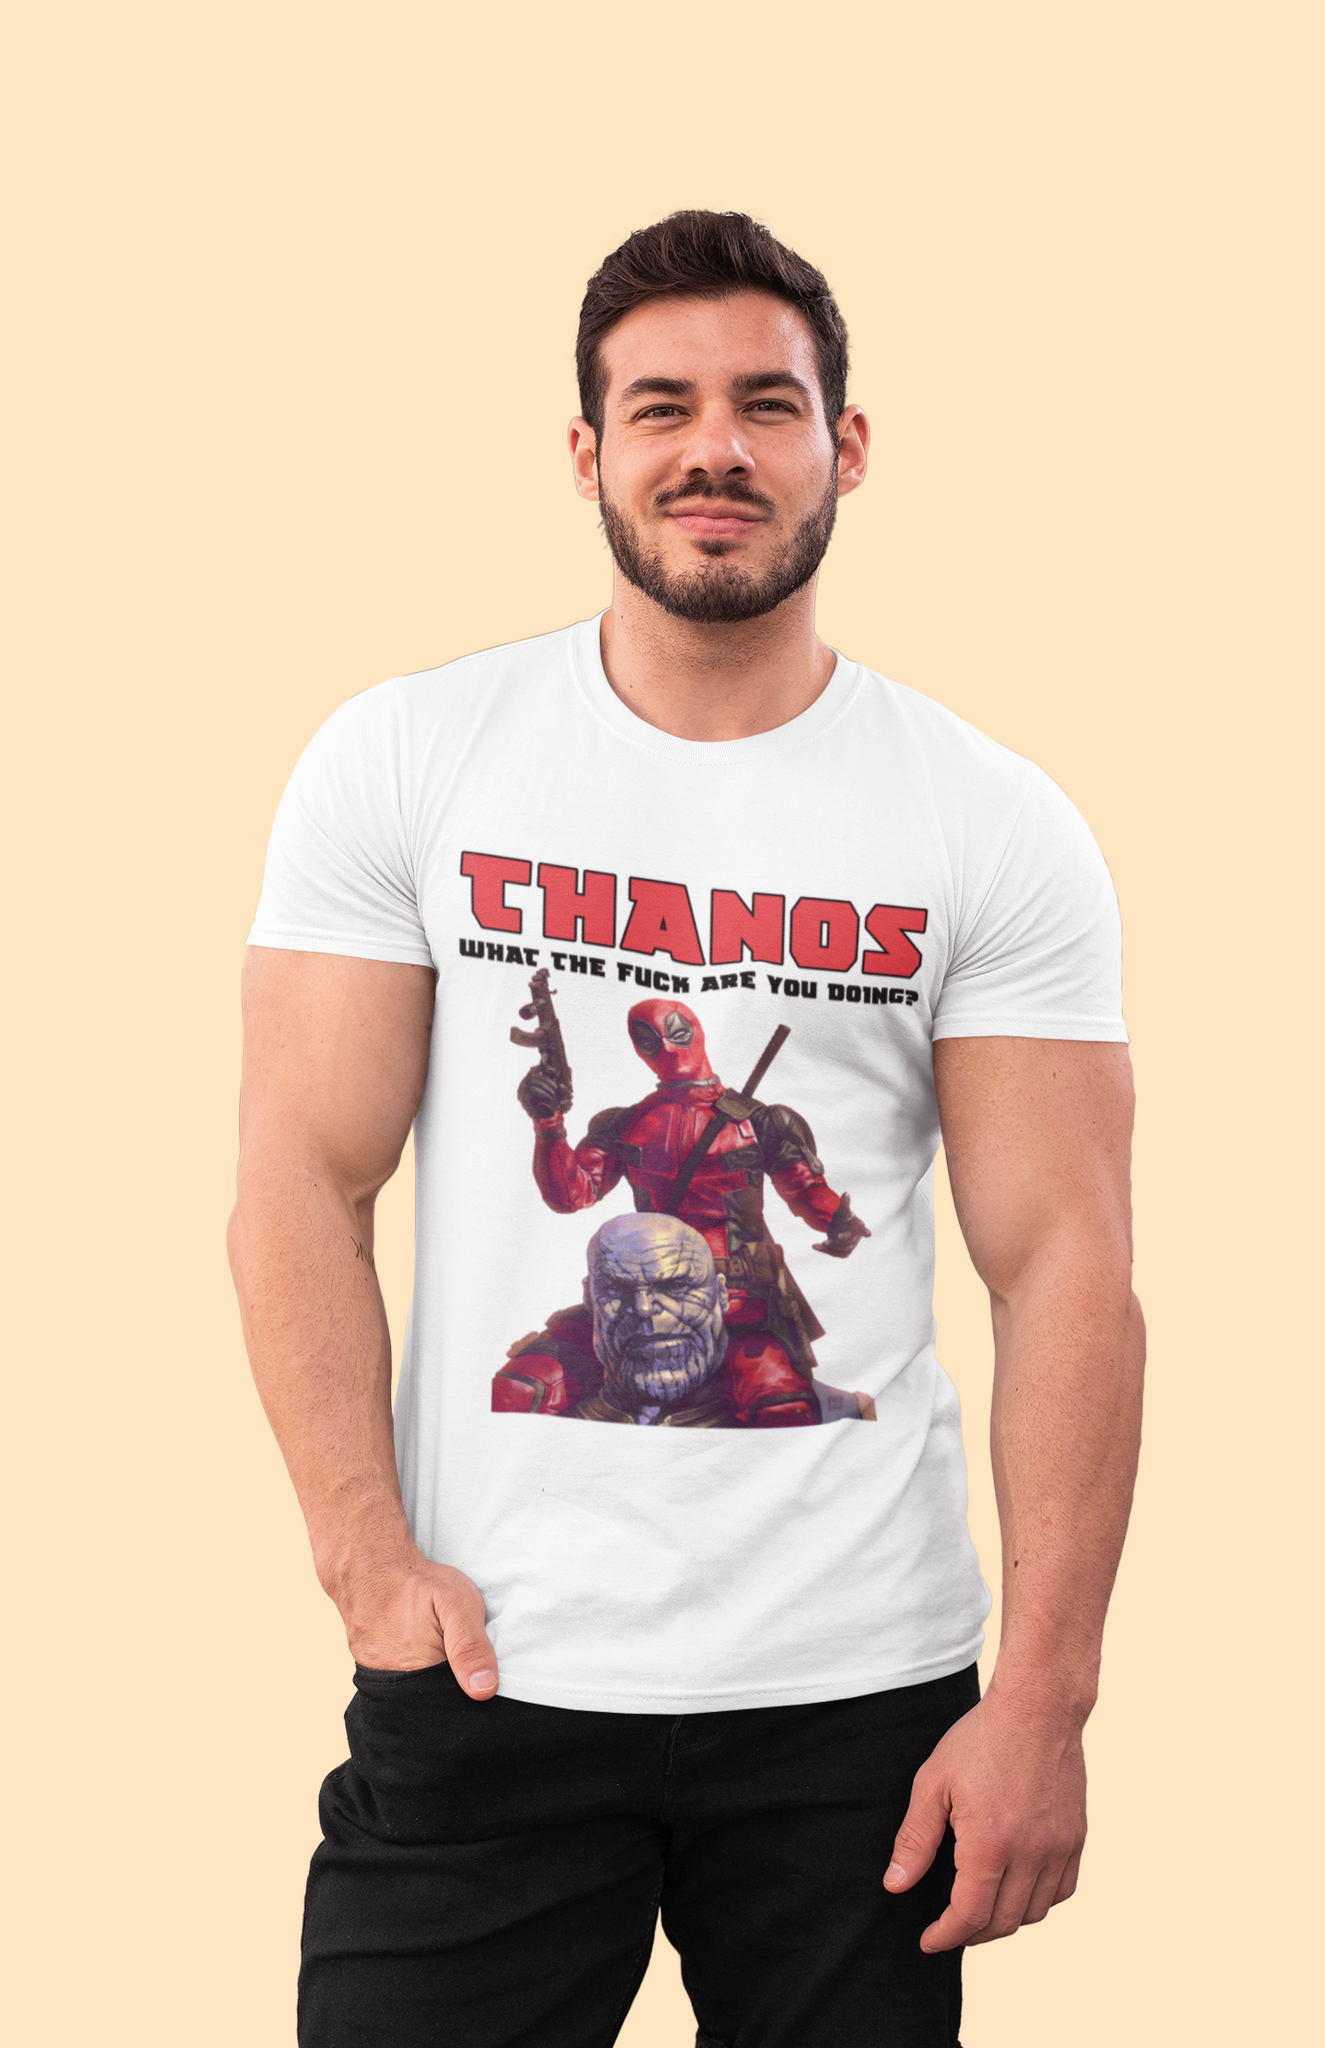 Deadpool T Shirt, What The Fuck Are You Doing Tshirt, Thanos Deadpool T Shirt